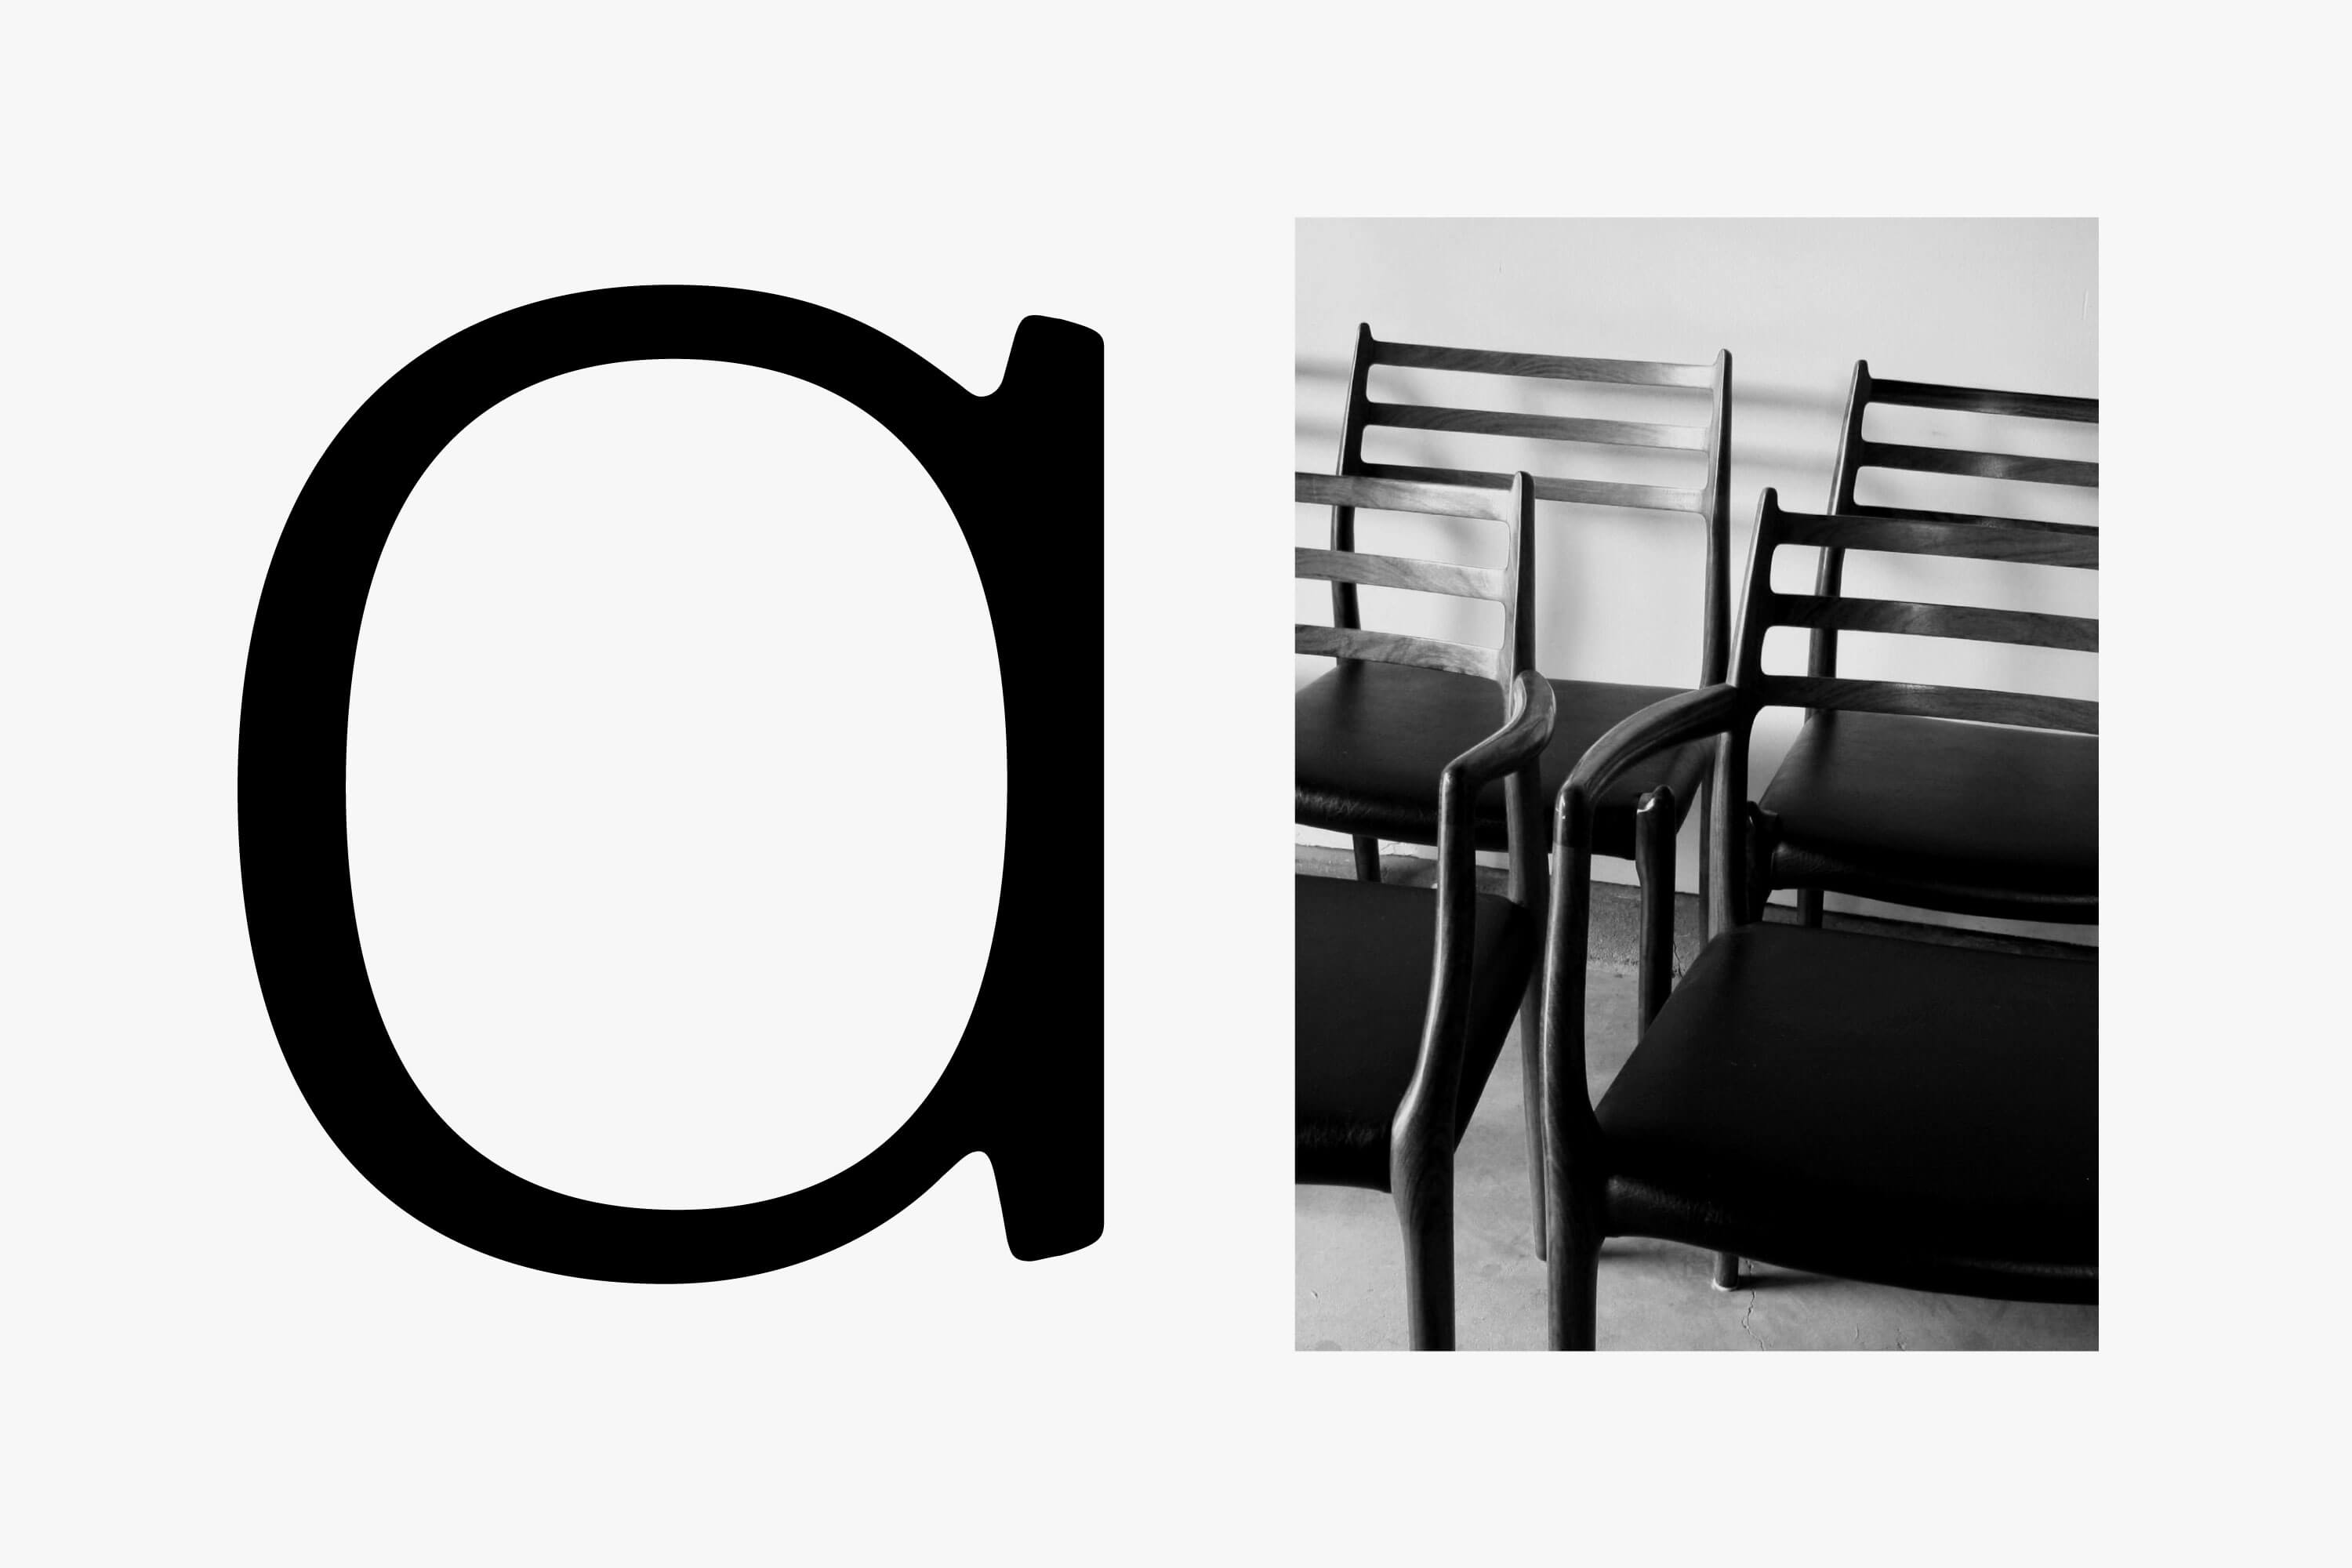 bespoke letter 'a' in black writing and black and white image of chairs